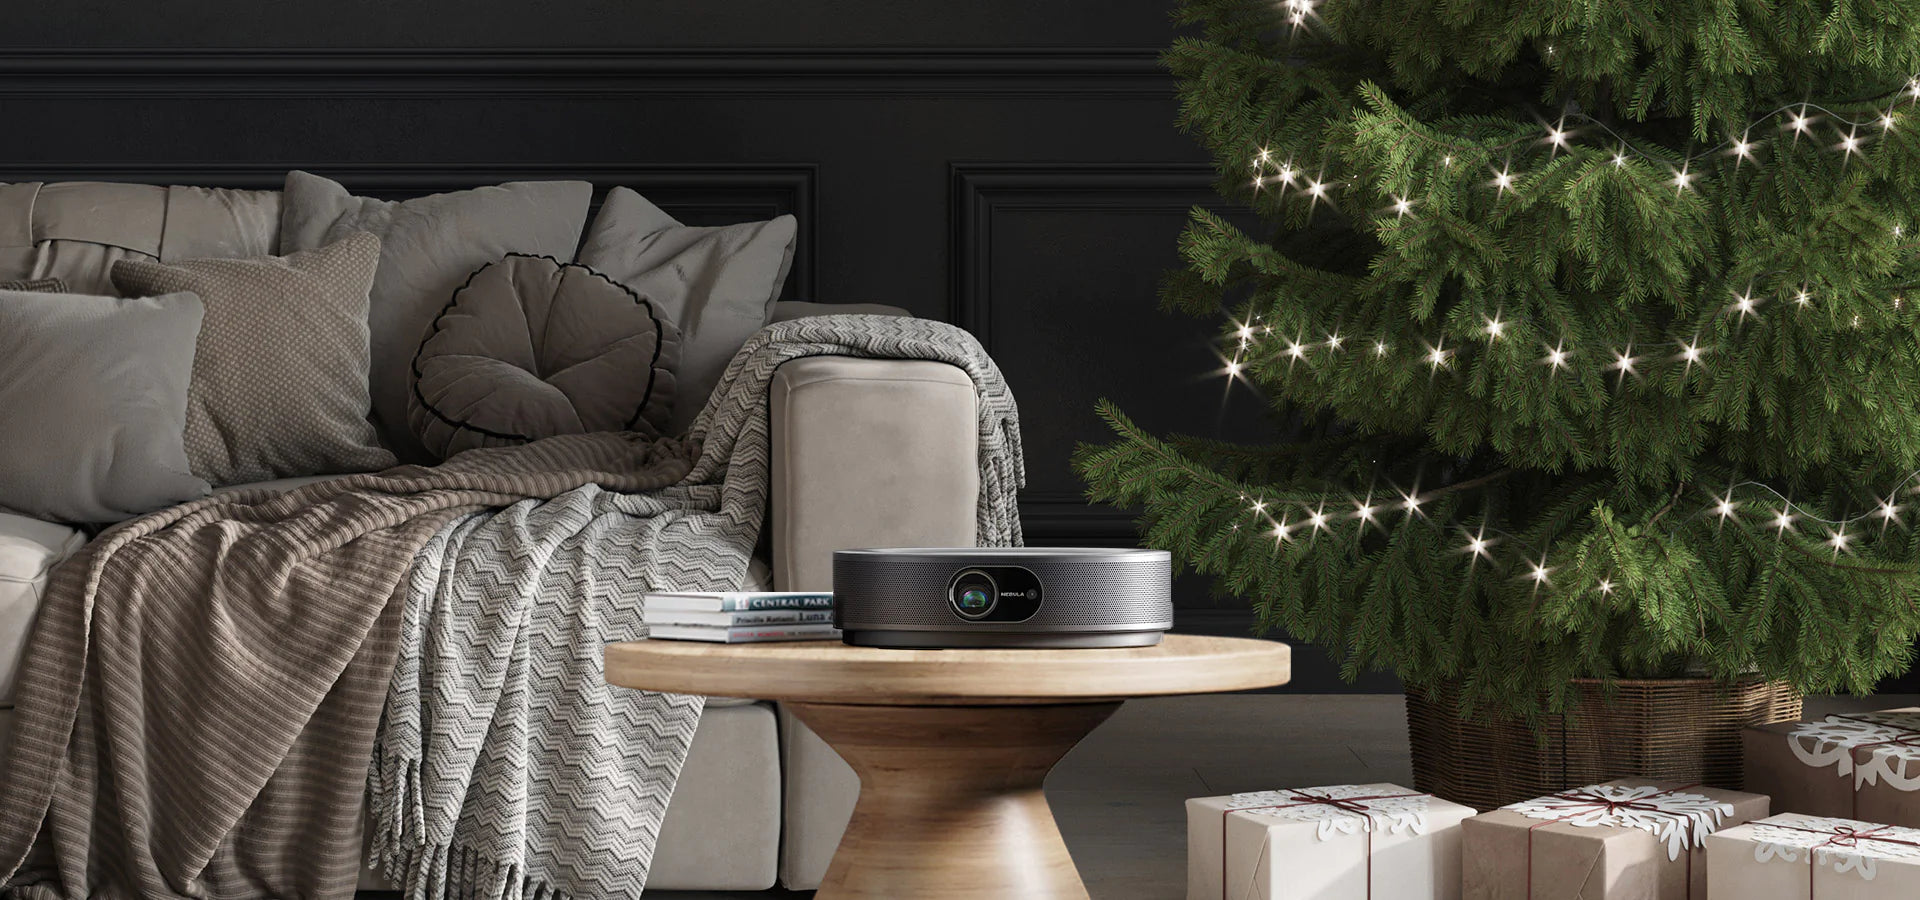 How to Add Some Holiday Spirit to Your Smart Projector？